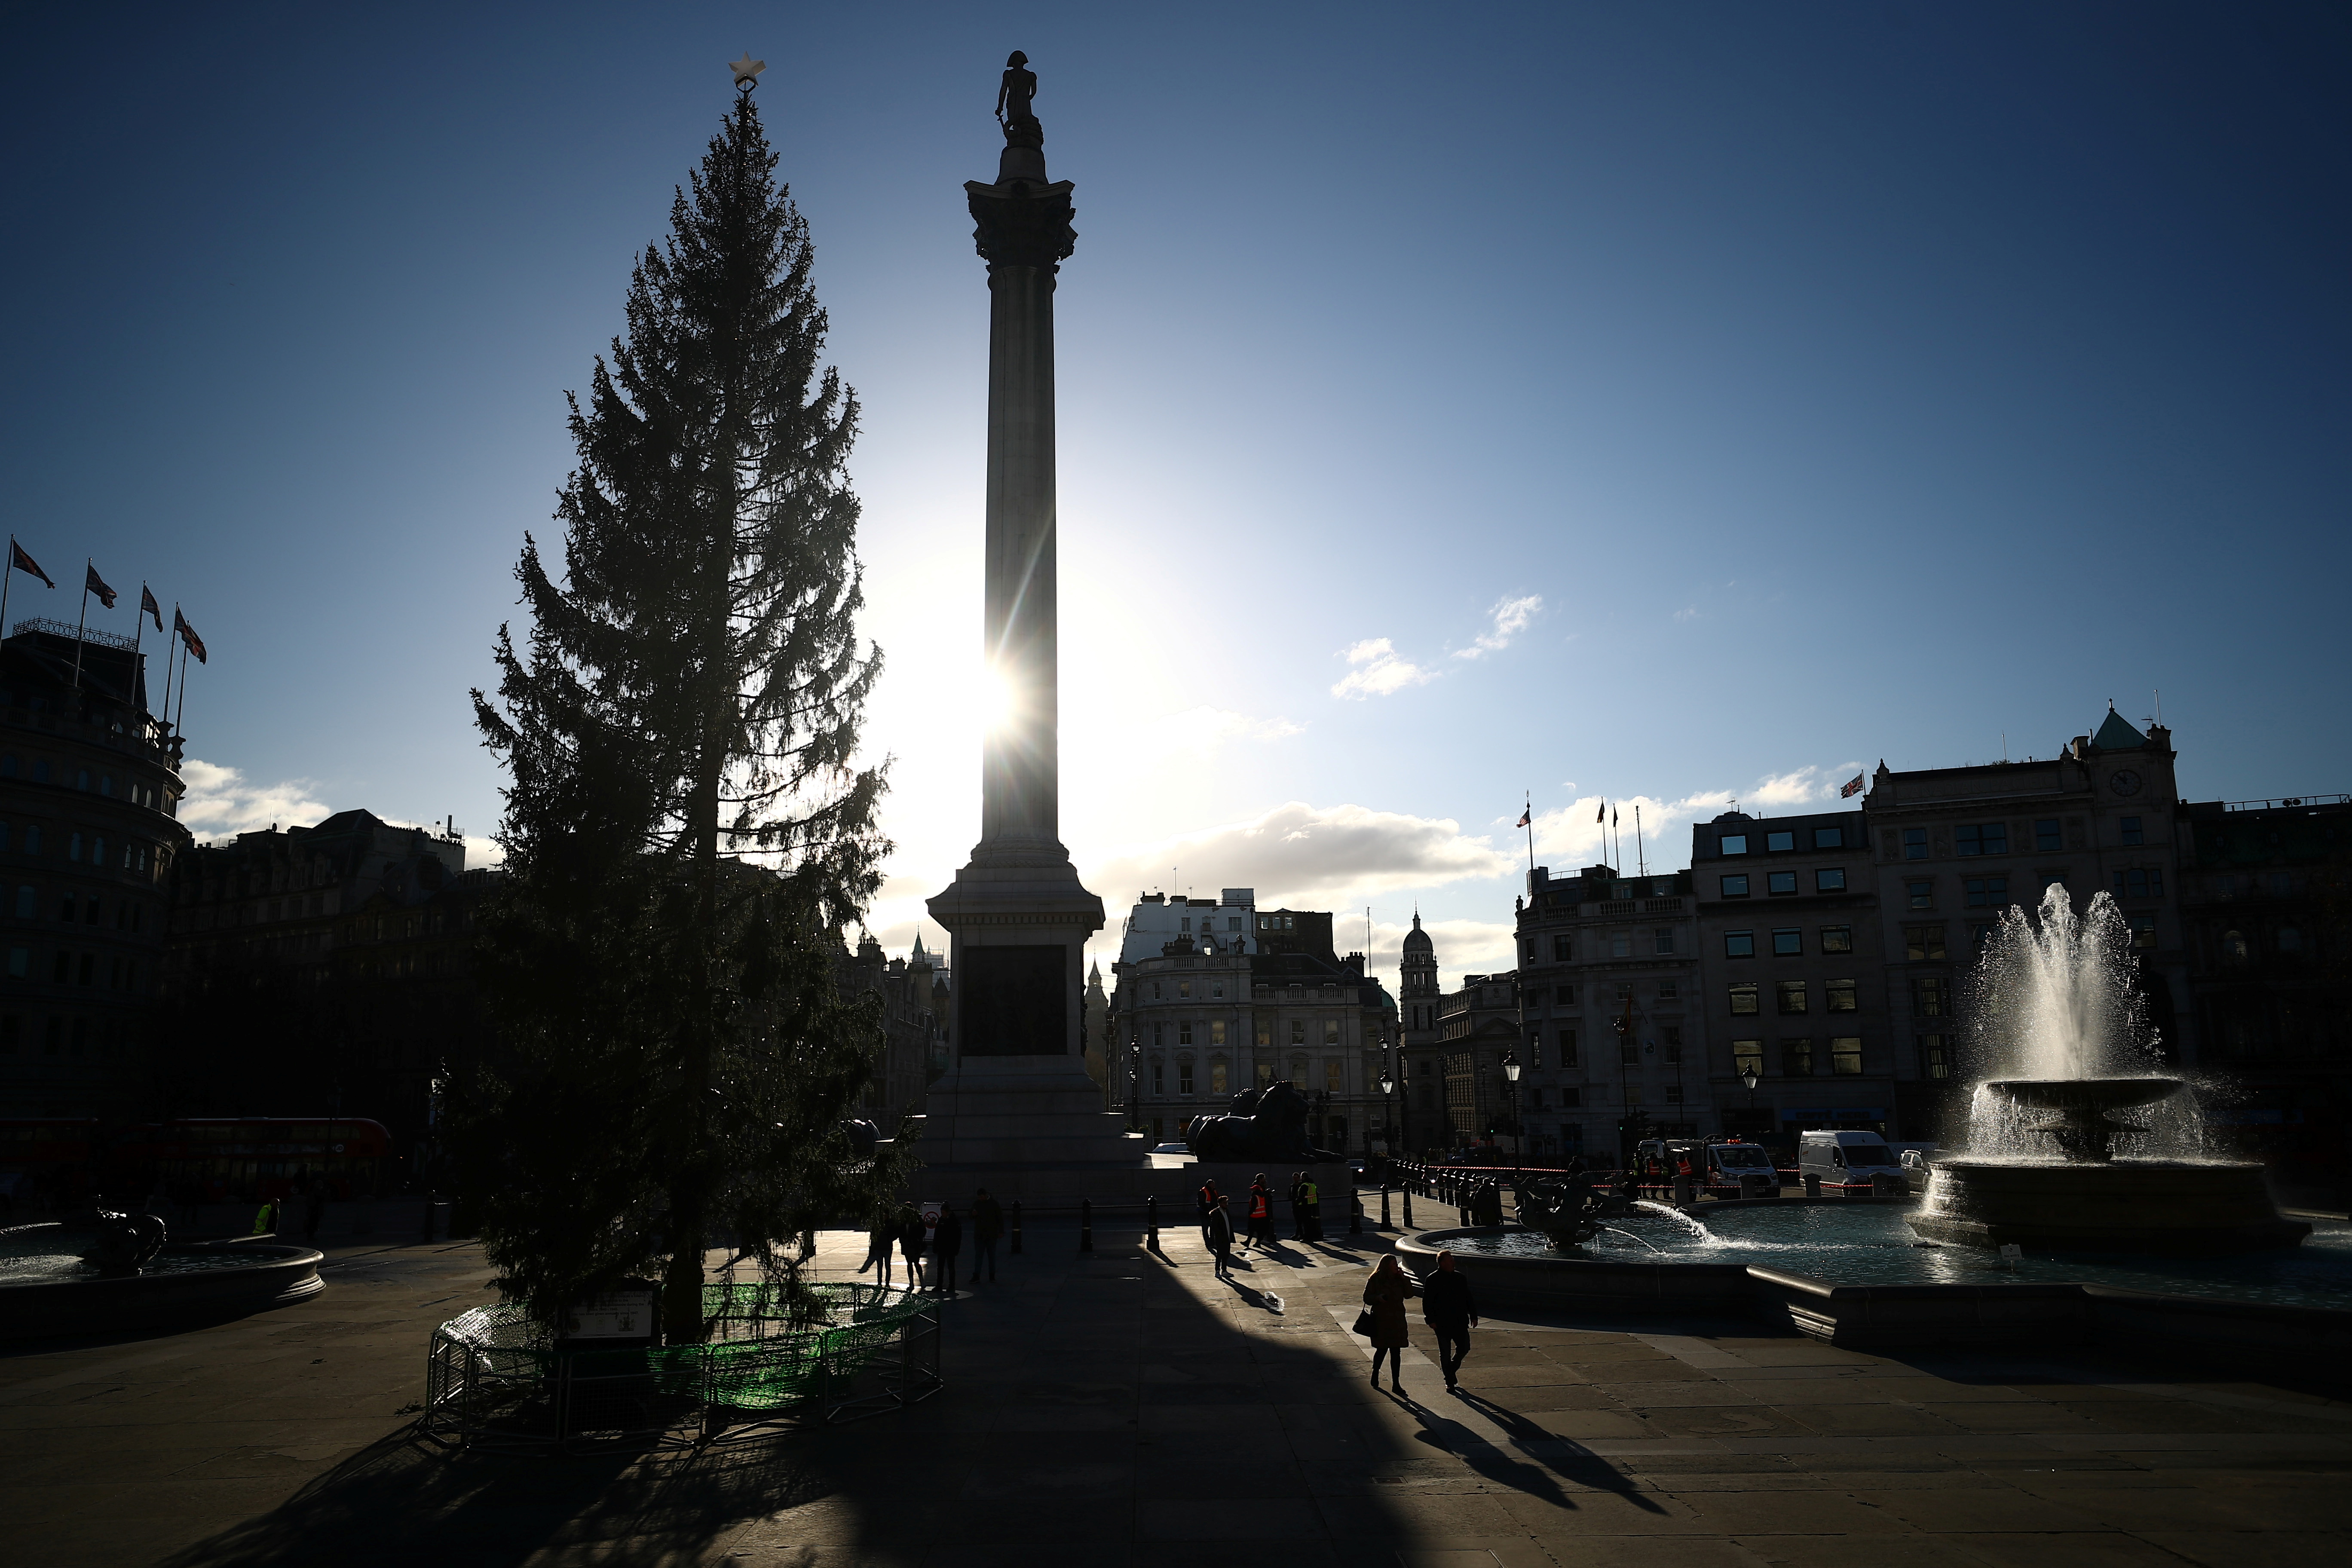 A view shows the Trafalgar Square Christmas tree, a gift from Norway, in Trafalgar Square, London, Britain, December 2, 2021. REUTERS/Hannah McKay